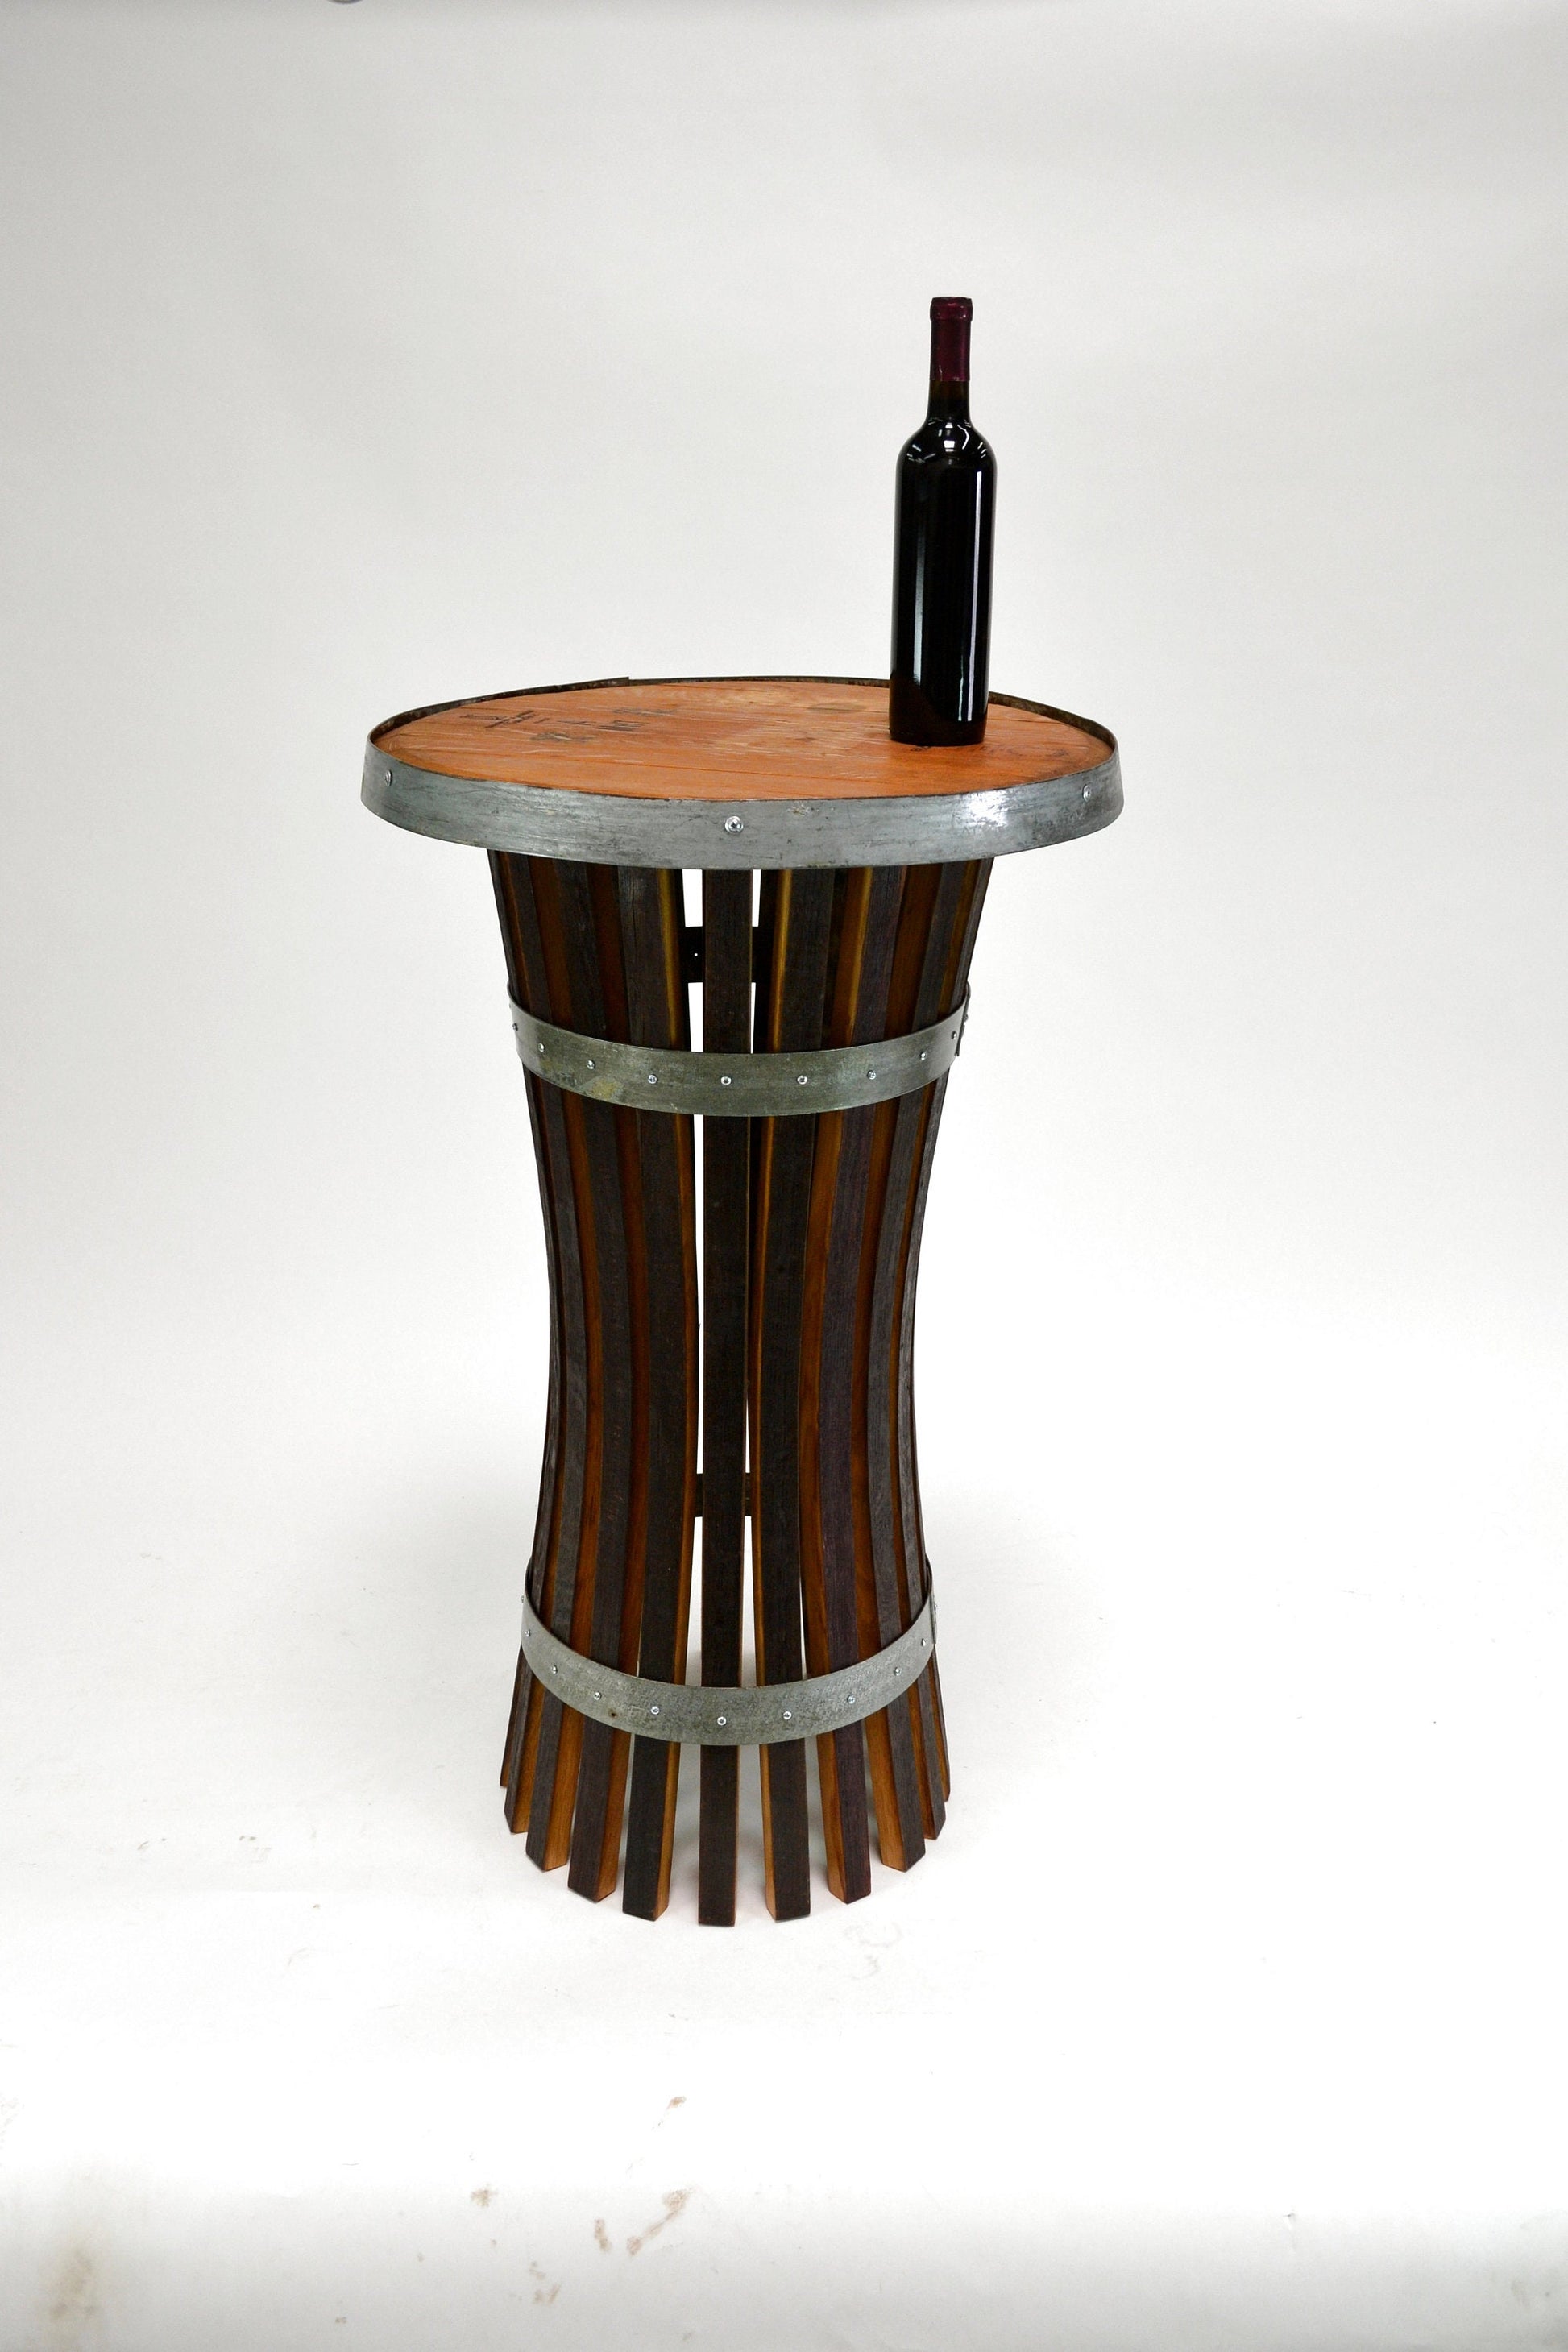 Wine Tasting / Pub Table - Yamato - Made from reclaimed CA wine barrels. 100% Recycled!